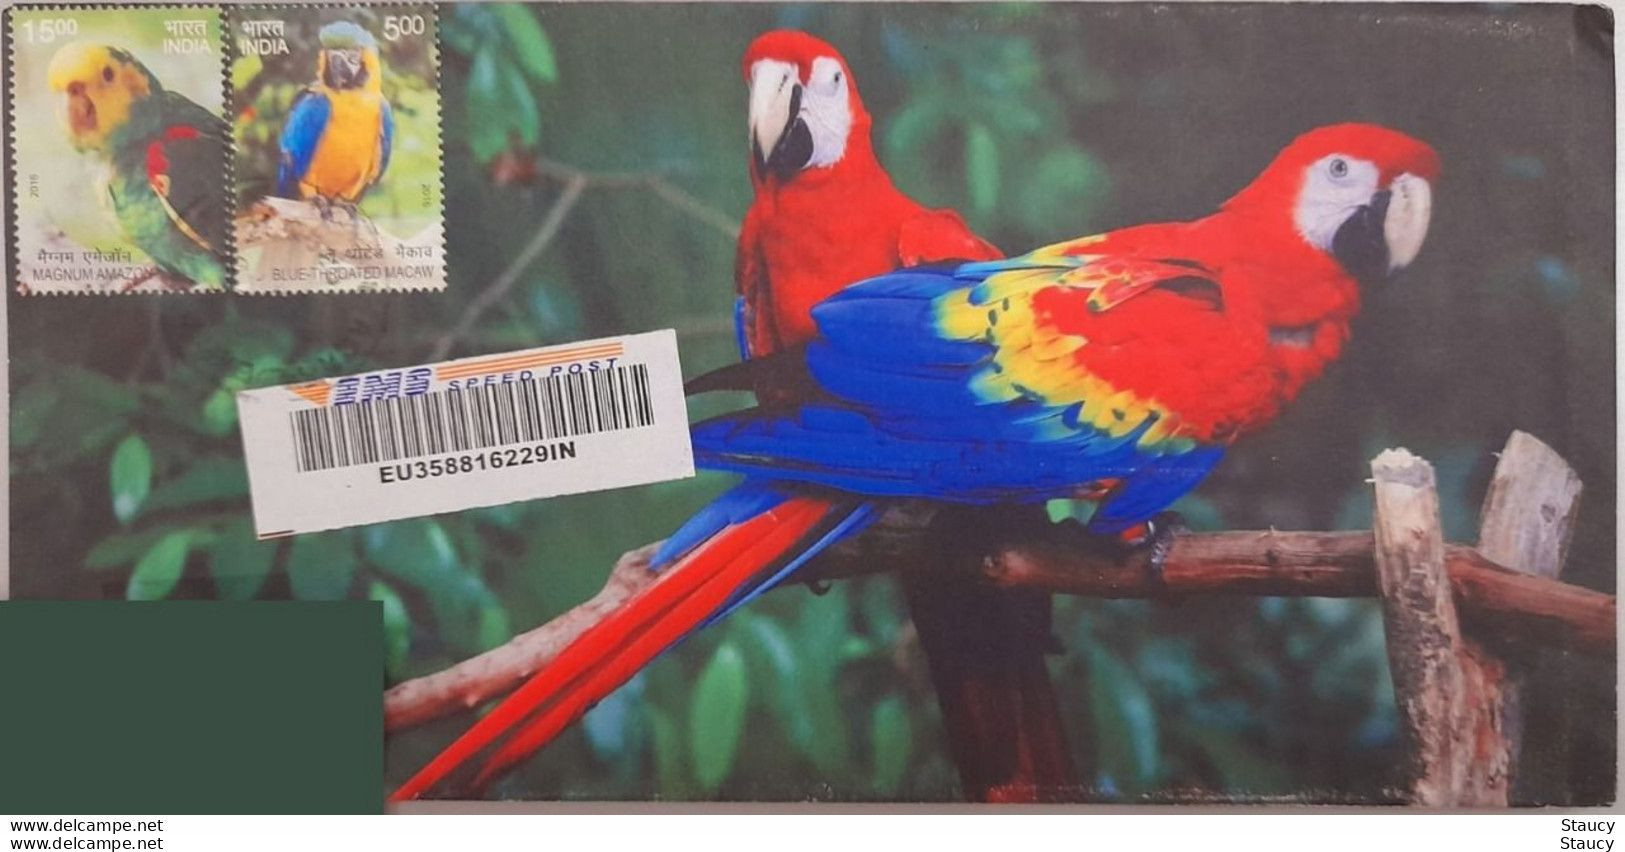 India 2018 Registered Speed Post Cover On Exotic Birds Issue Stamps / Parrots On Stamp Postally / Commercially Used - Cuco, Cuclillos